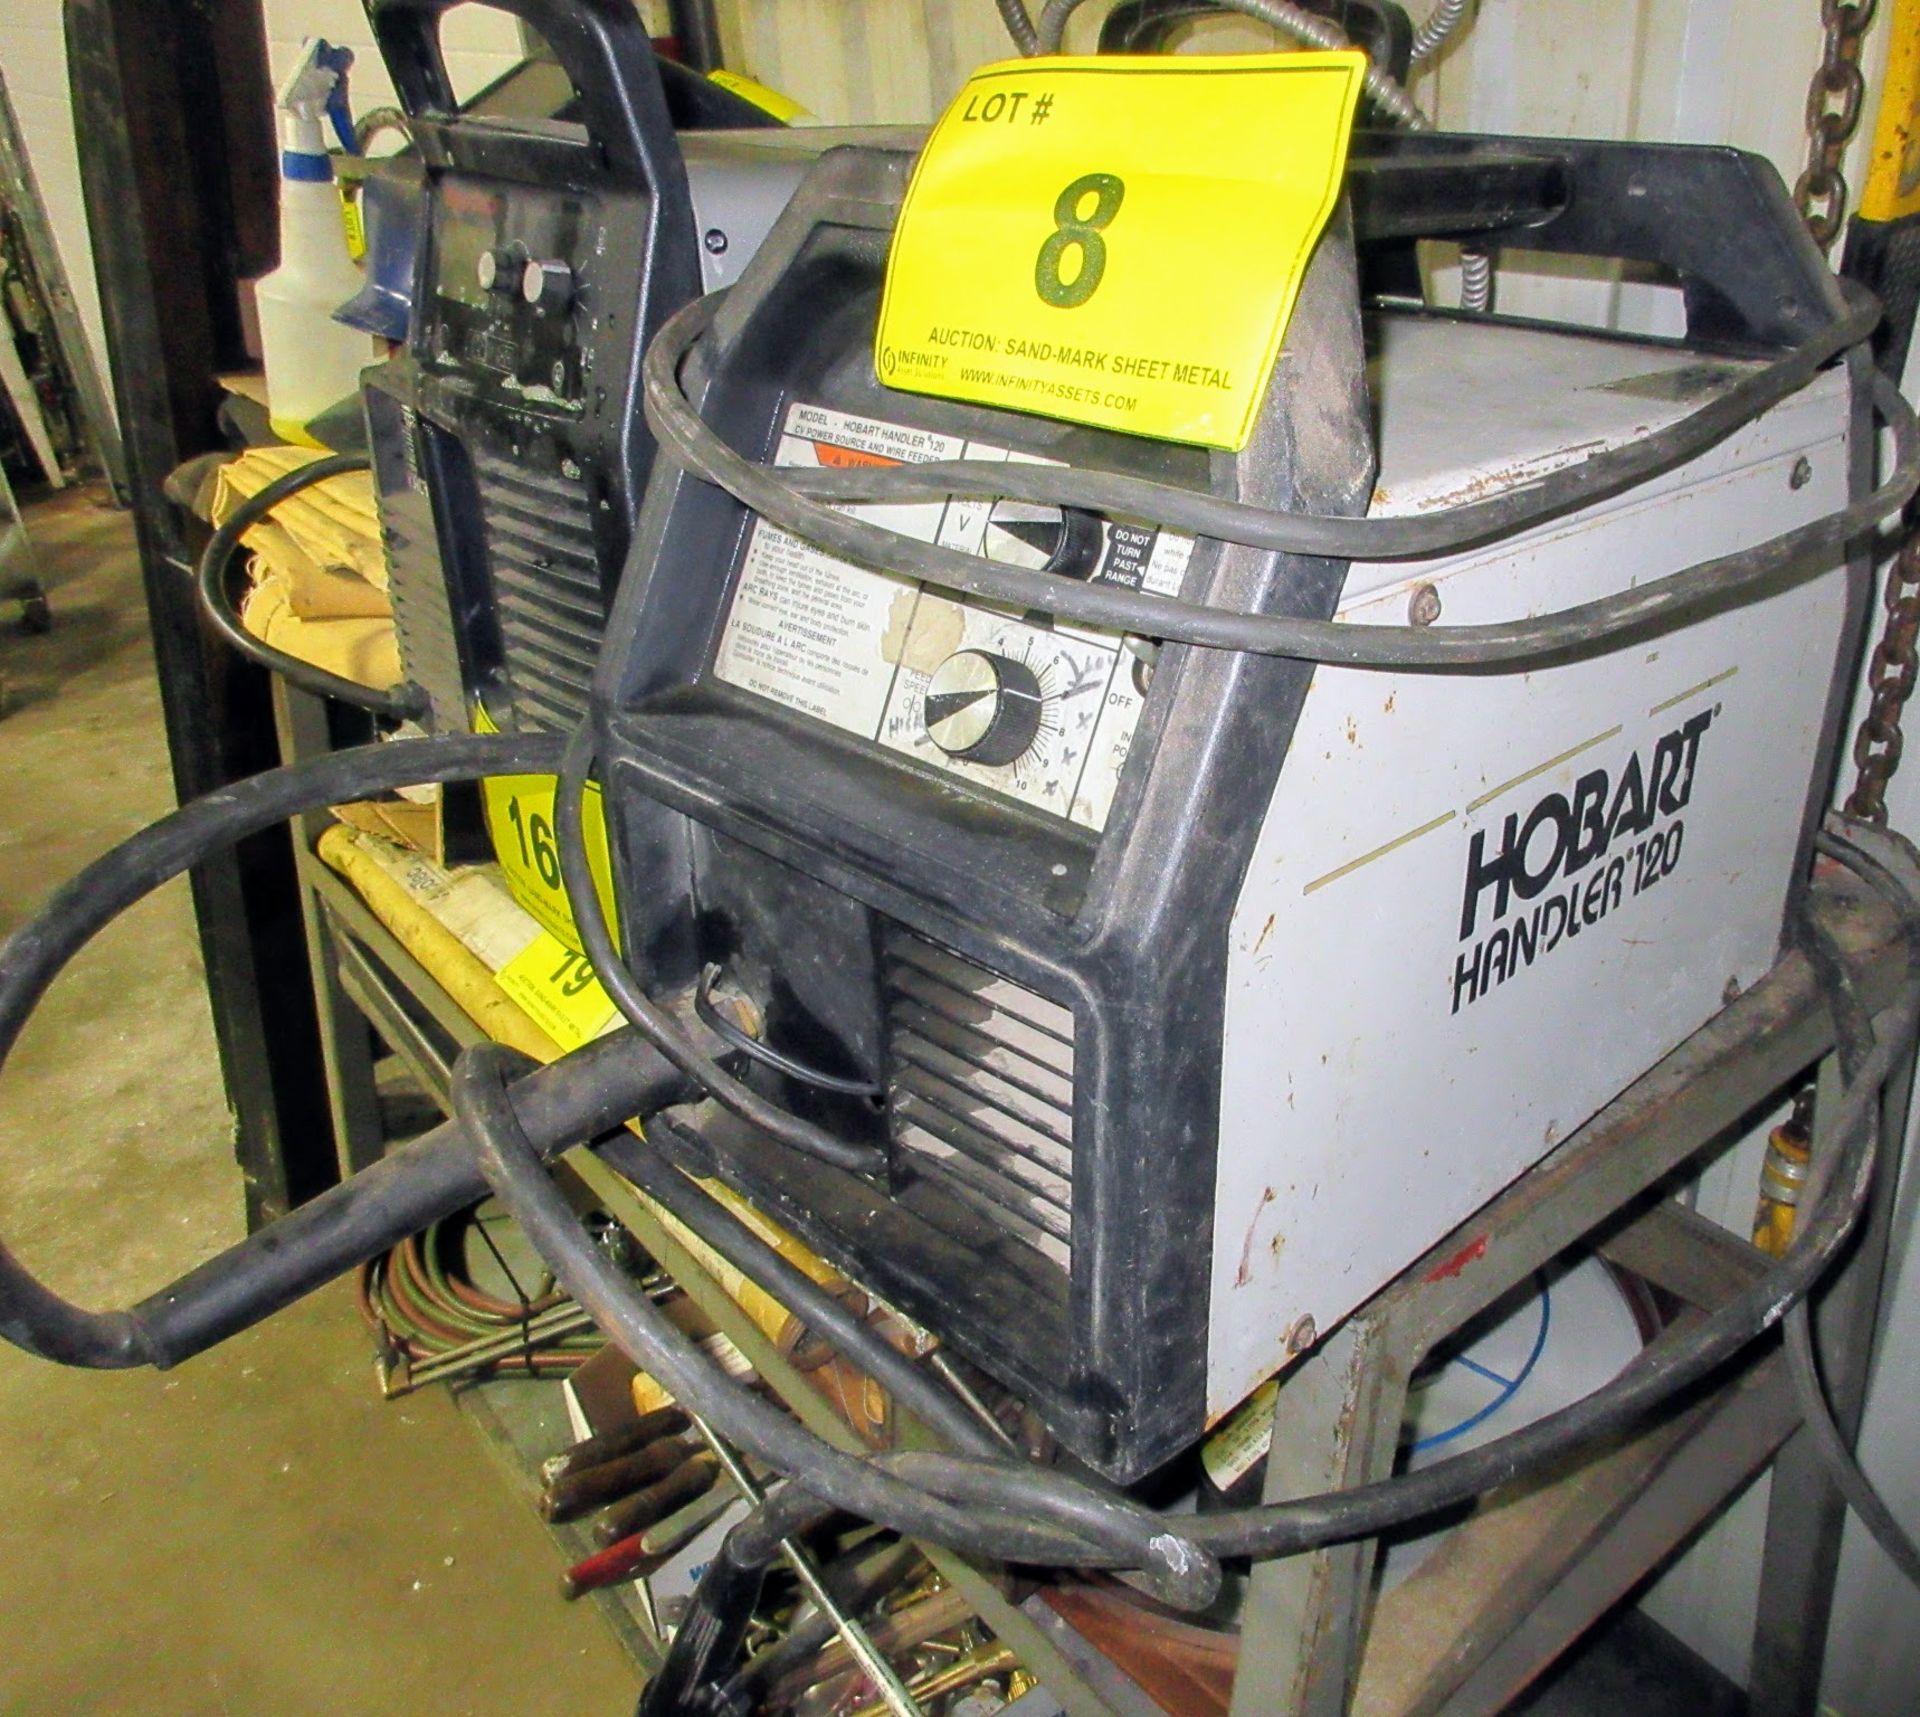 HOBART HANDLER 120 CV POWER SOURCE AND WIRE FEED W/ CABLES - Image 2 of 3